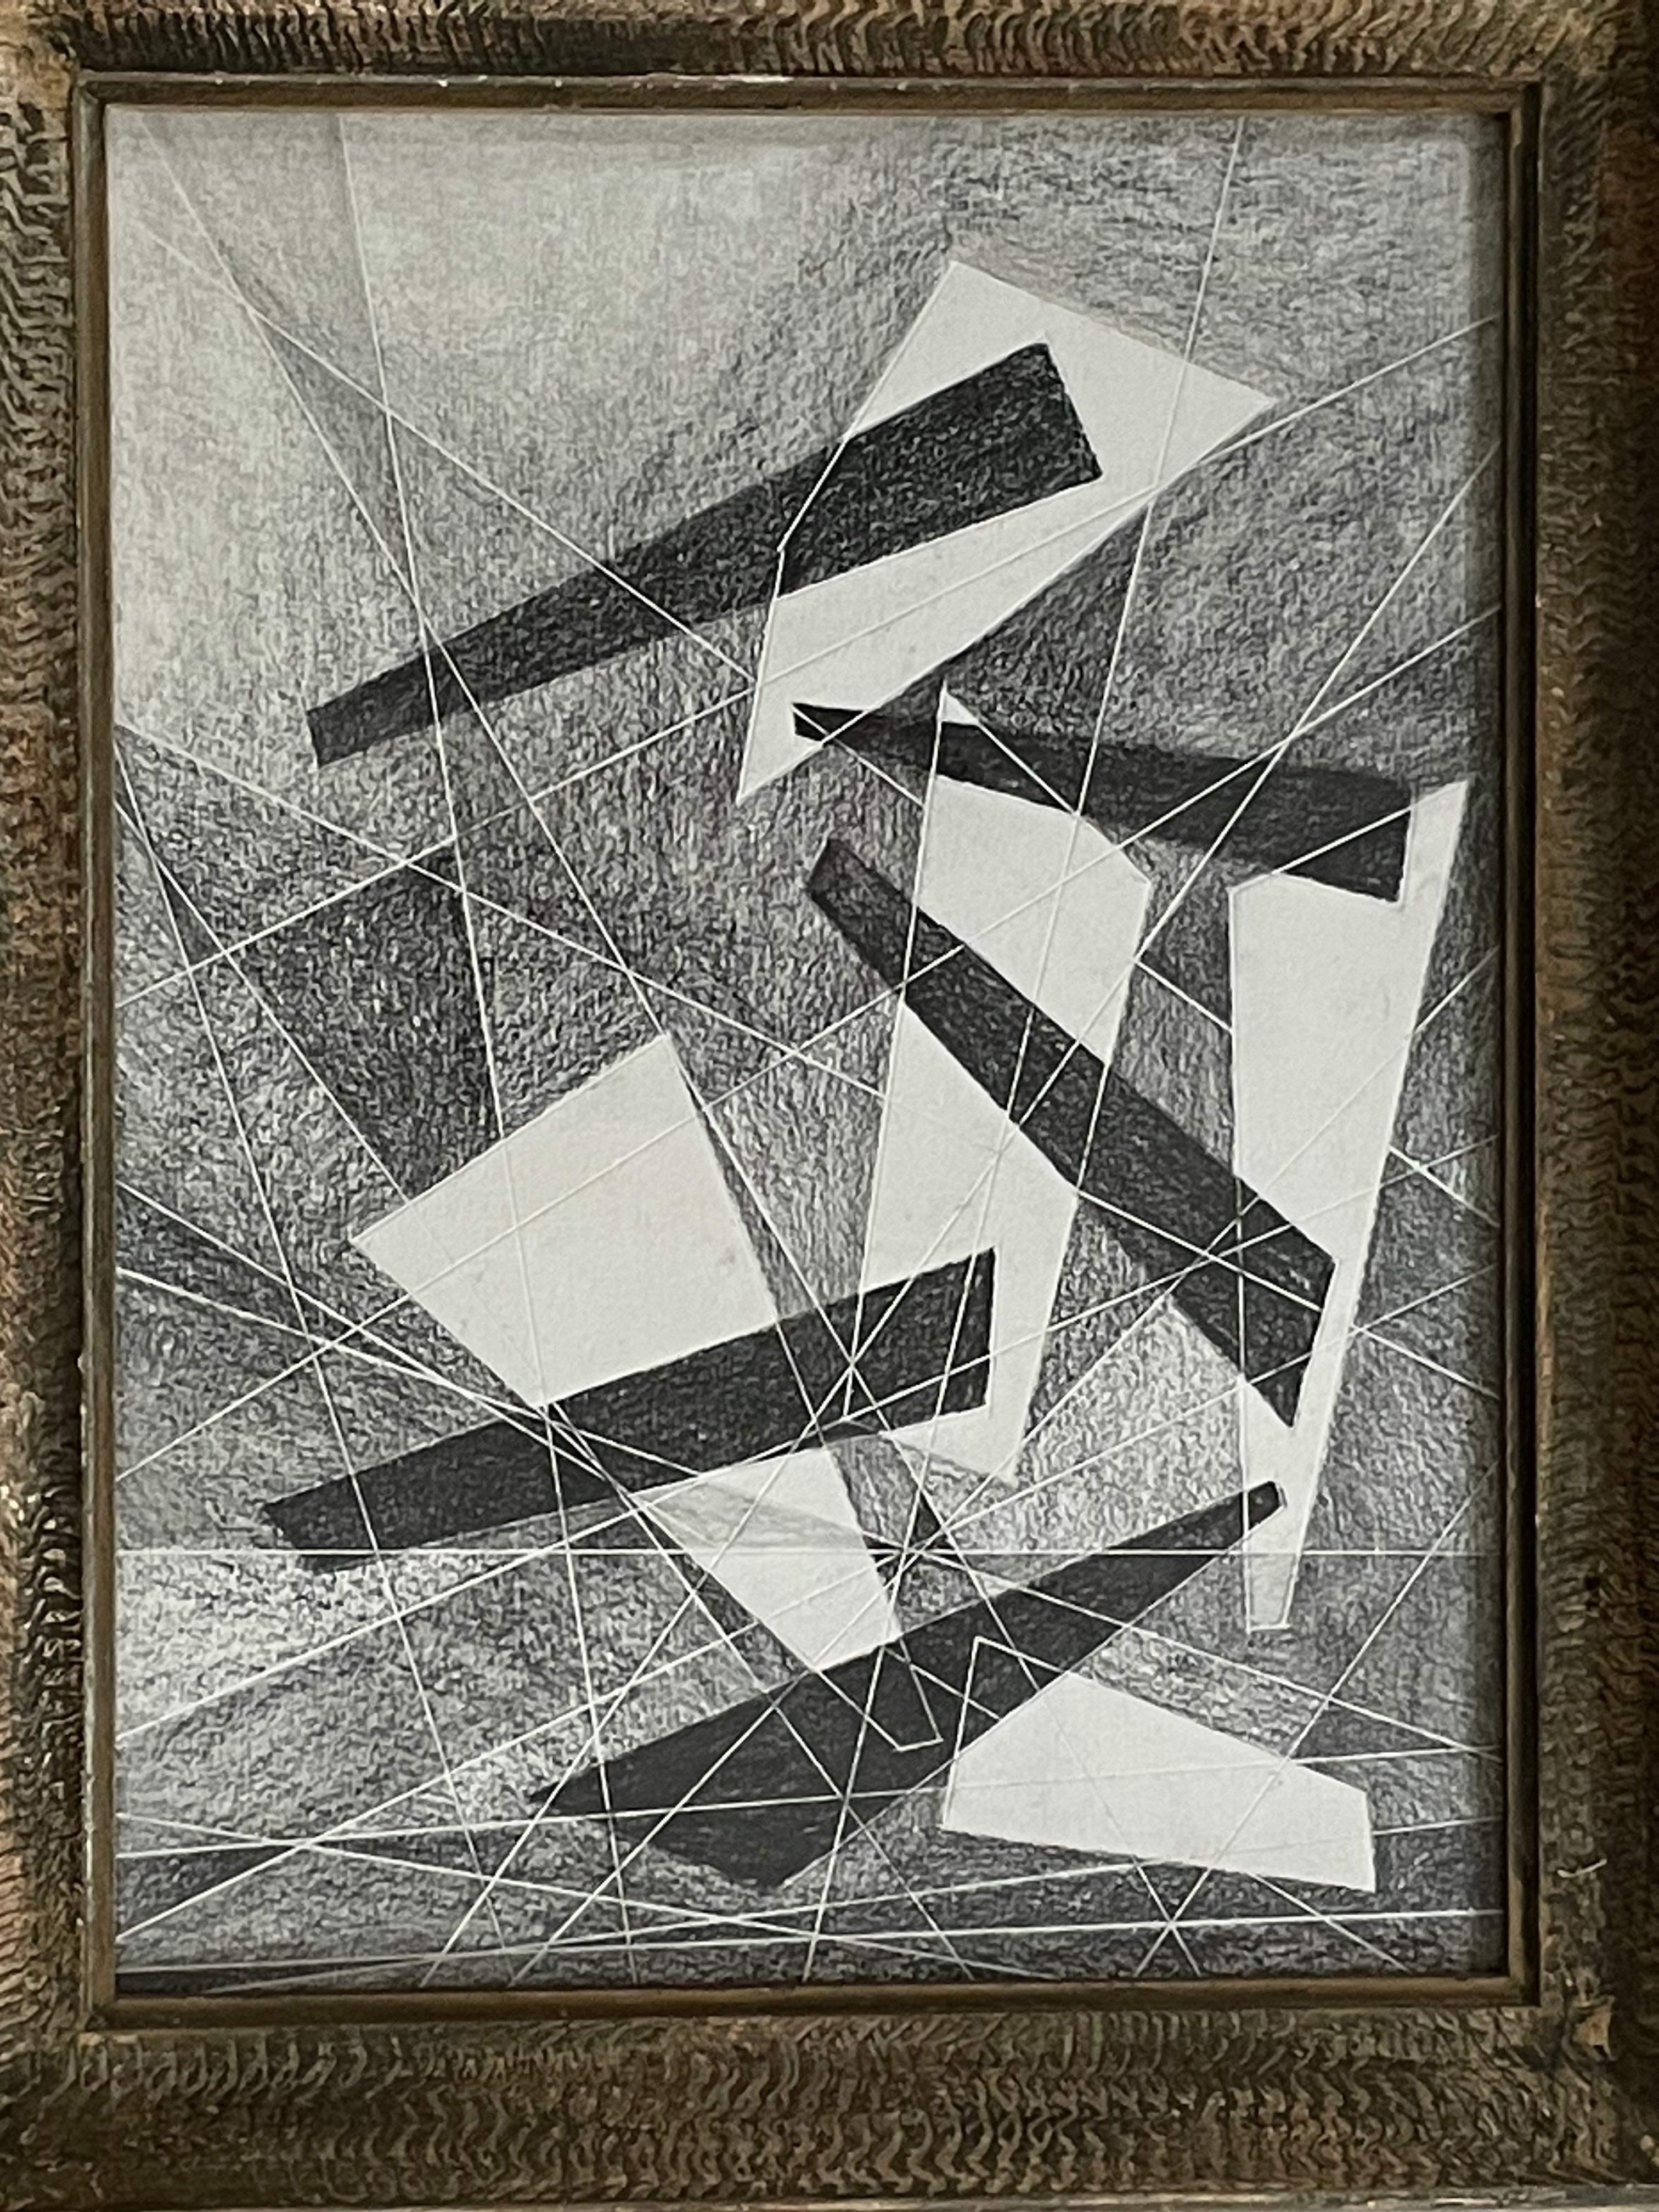 American Graphite Drawing in Vintage Frame by David Dew Bruner, USA, Contemporary